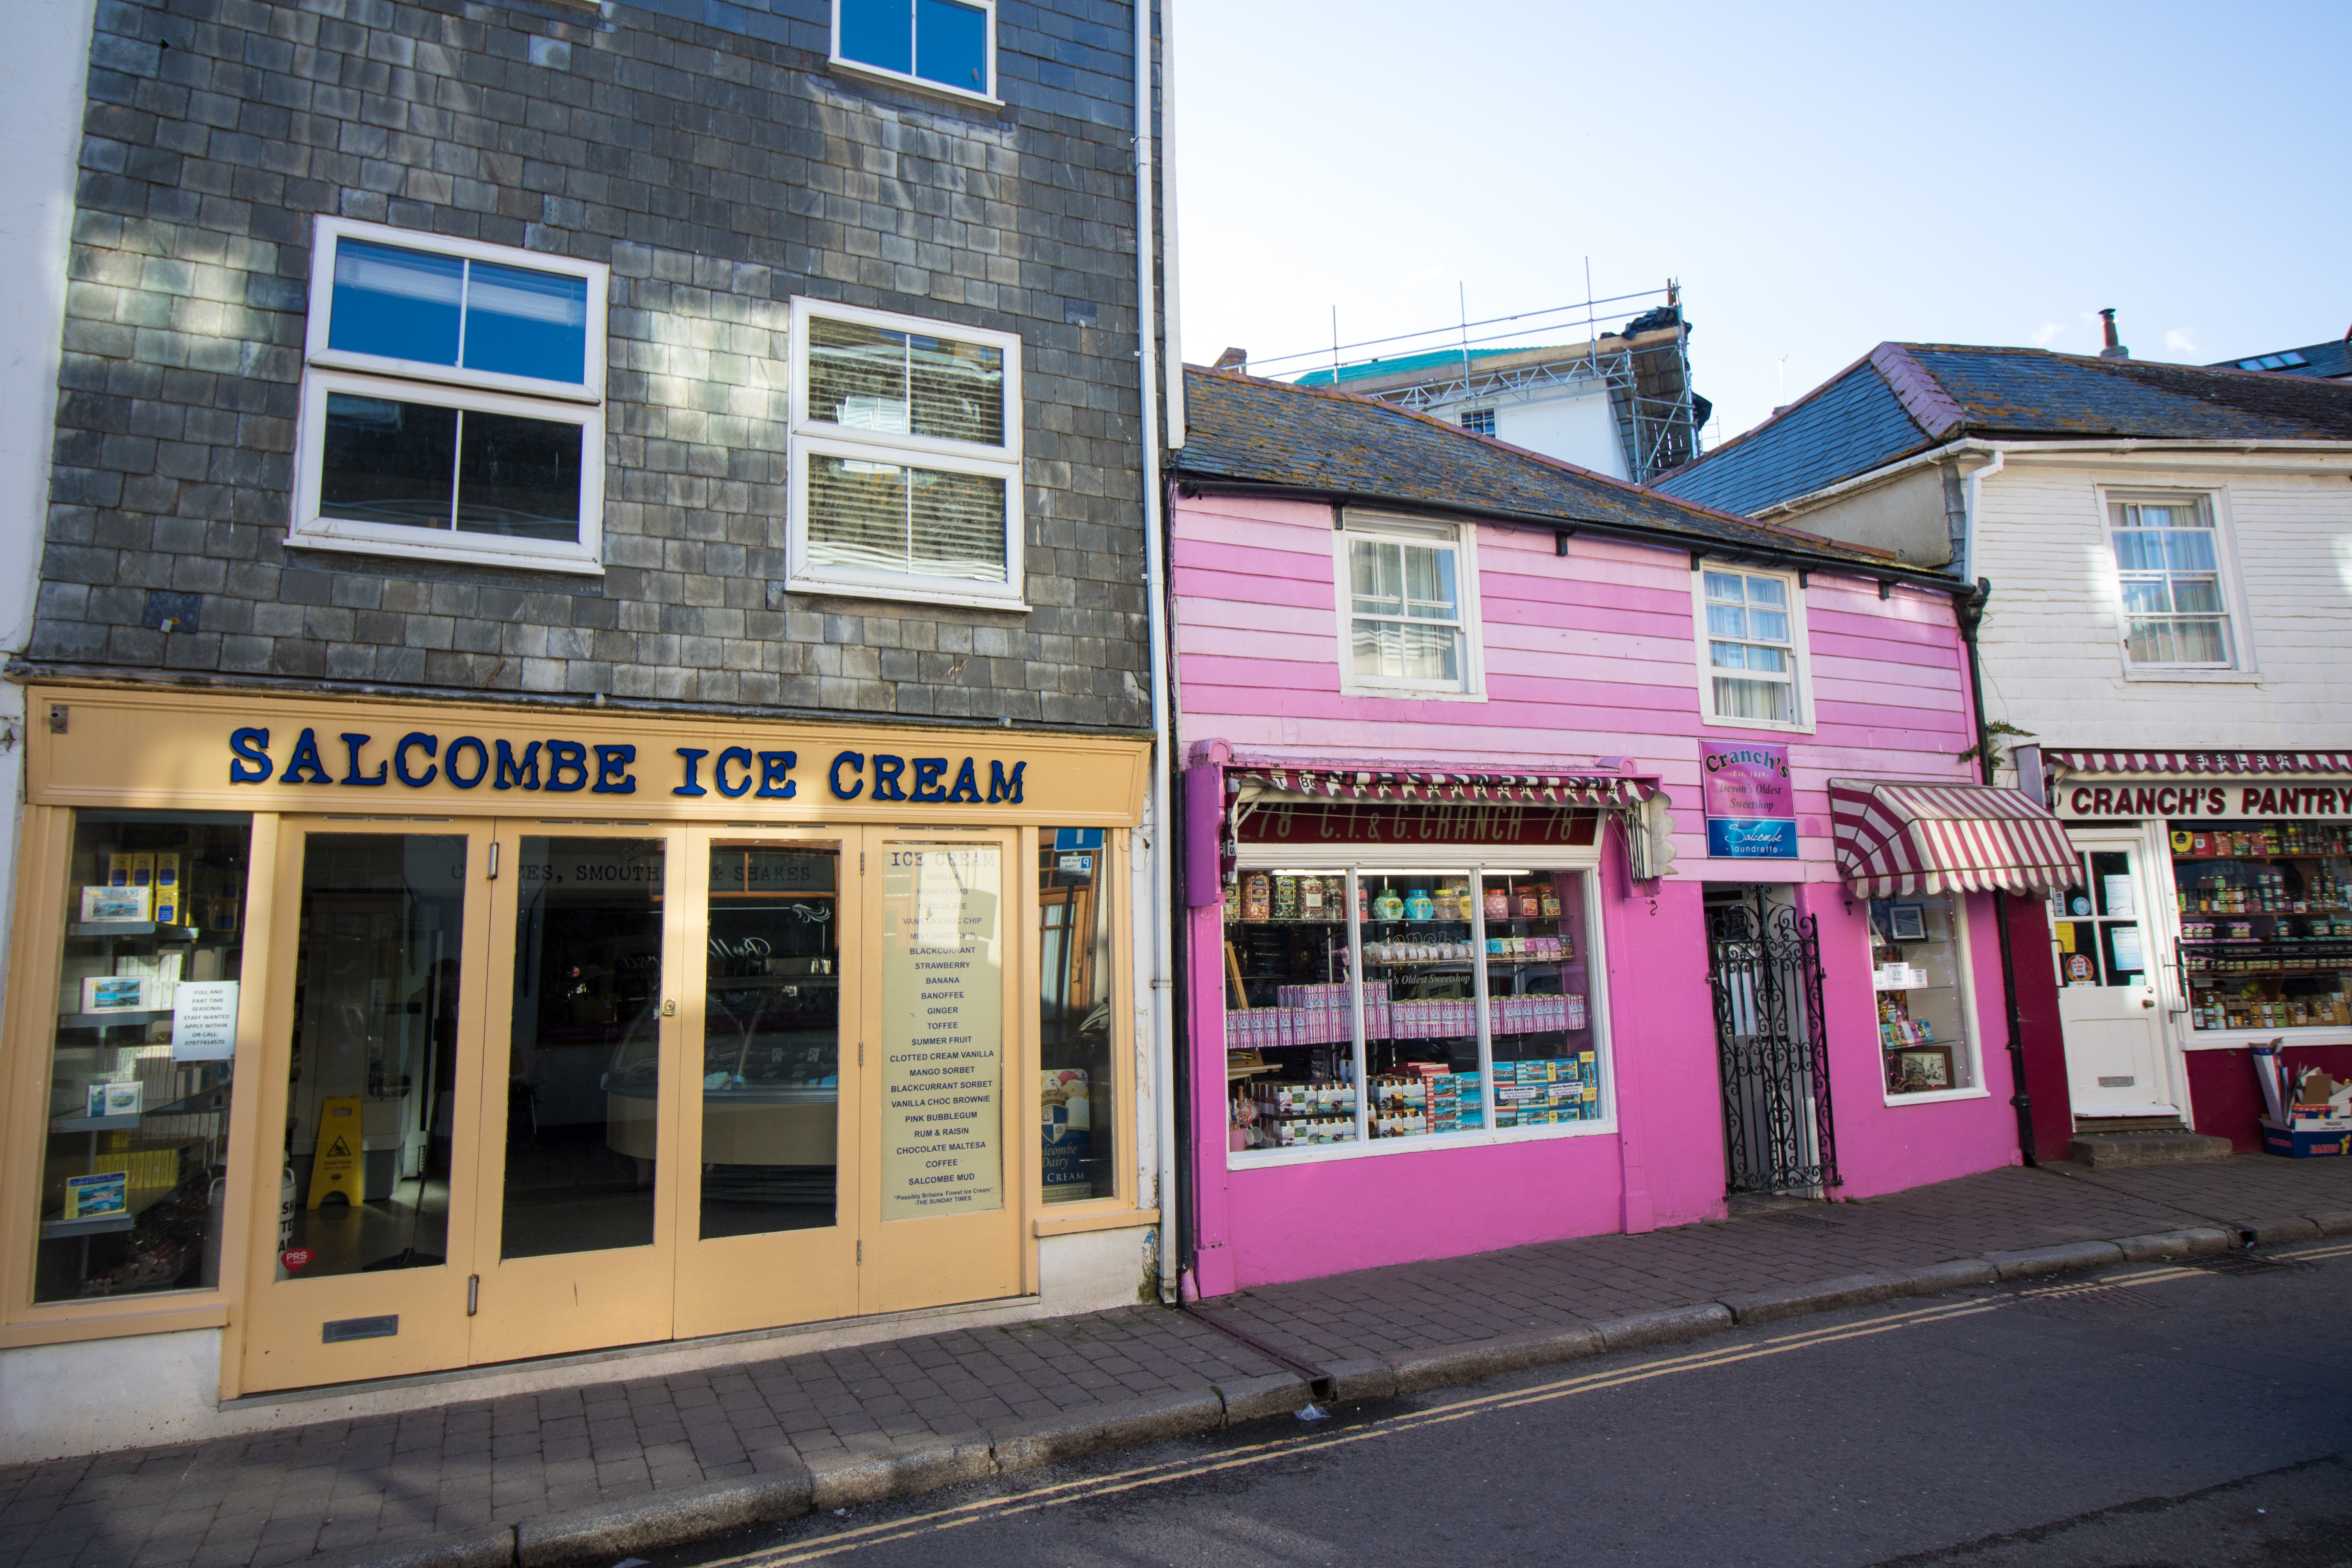 Colourful shop fronts. Salcombe Ice Cream yellow shop. Pink sweet shop. Cranch's Devon's oldest sweetshop. British street in seaside town. 17 Beautiful Places to Visit in Devon for a Great Day Out. Devon England. Devon UK. Things to do in Devon. Places to see in Devon. What to see in Devon. Things to see in Devon. What to do in Devon. Devon attractions. Devon top attractions. Devon travel blog. Devon travel guide. The English Riviera. Exeter. Plymouth. Dartmouth. Dartmoor National Park. Exmoor National Park. Salcombe. Clovelly. Totnes. Appledore. Watermouth. Croyde. Woolacombe. Dartmouth. Ilfracombe. Beer. Burgh Island. Lundy Island. Click through to read more...